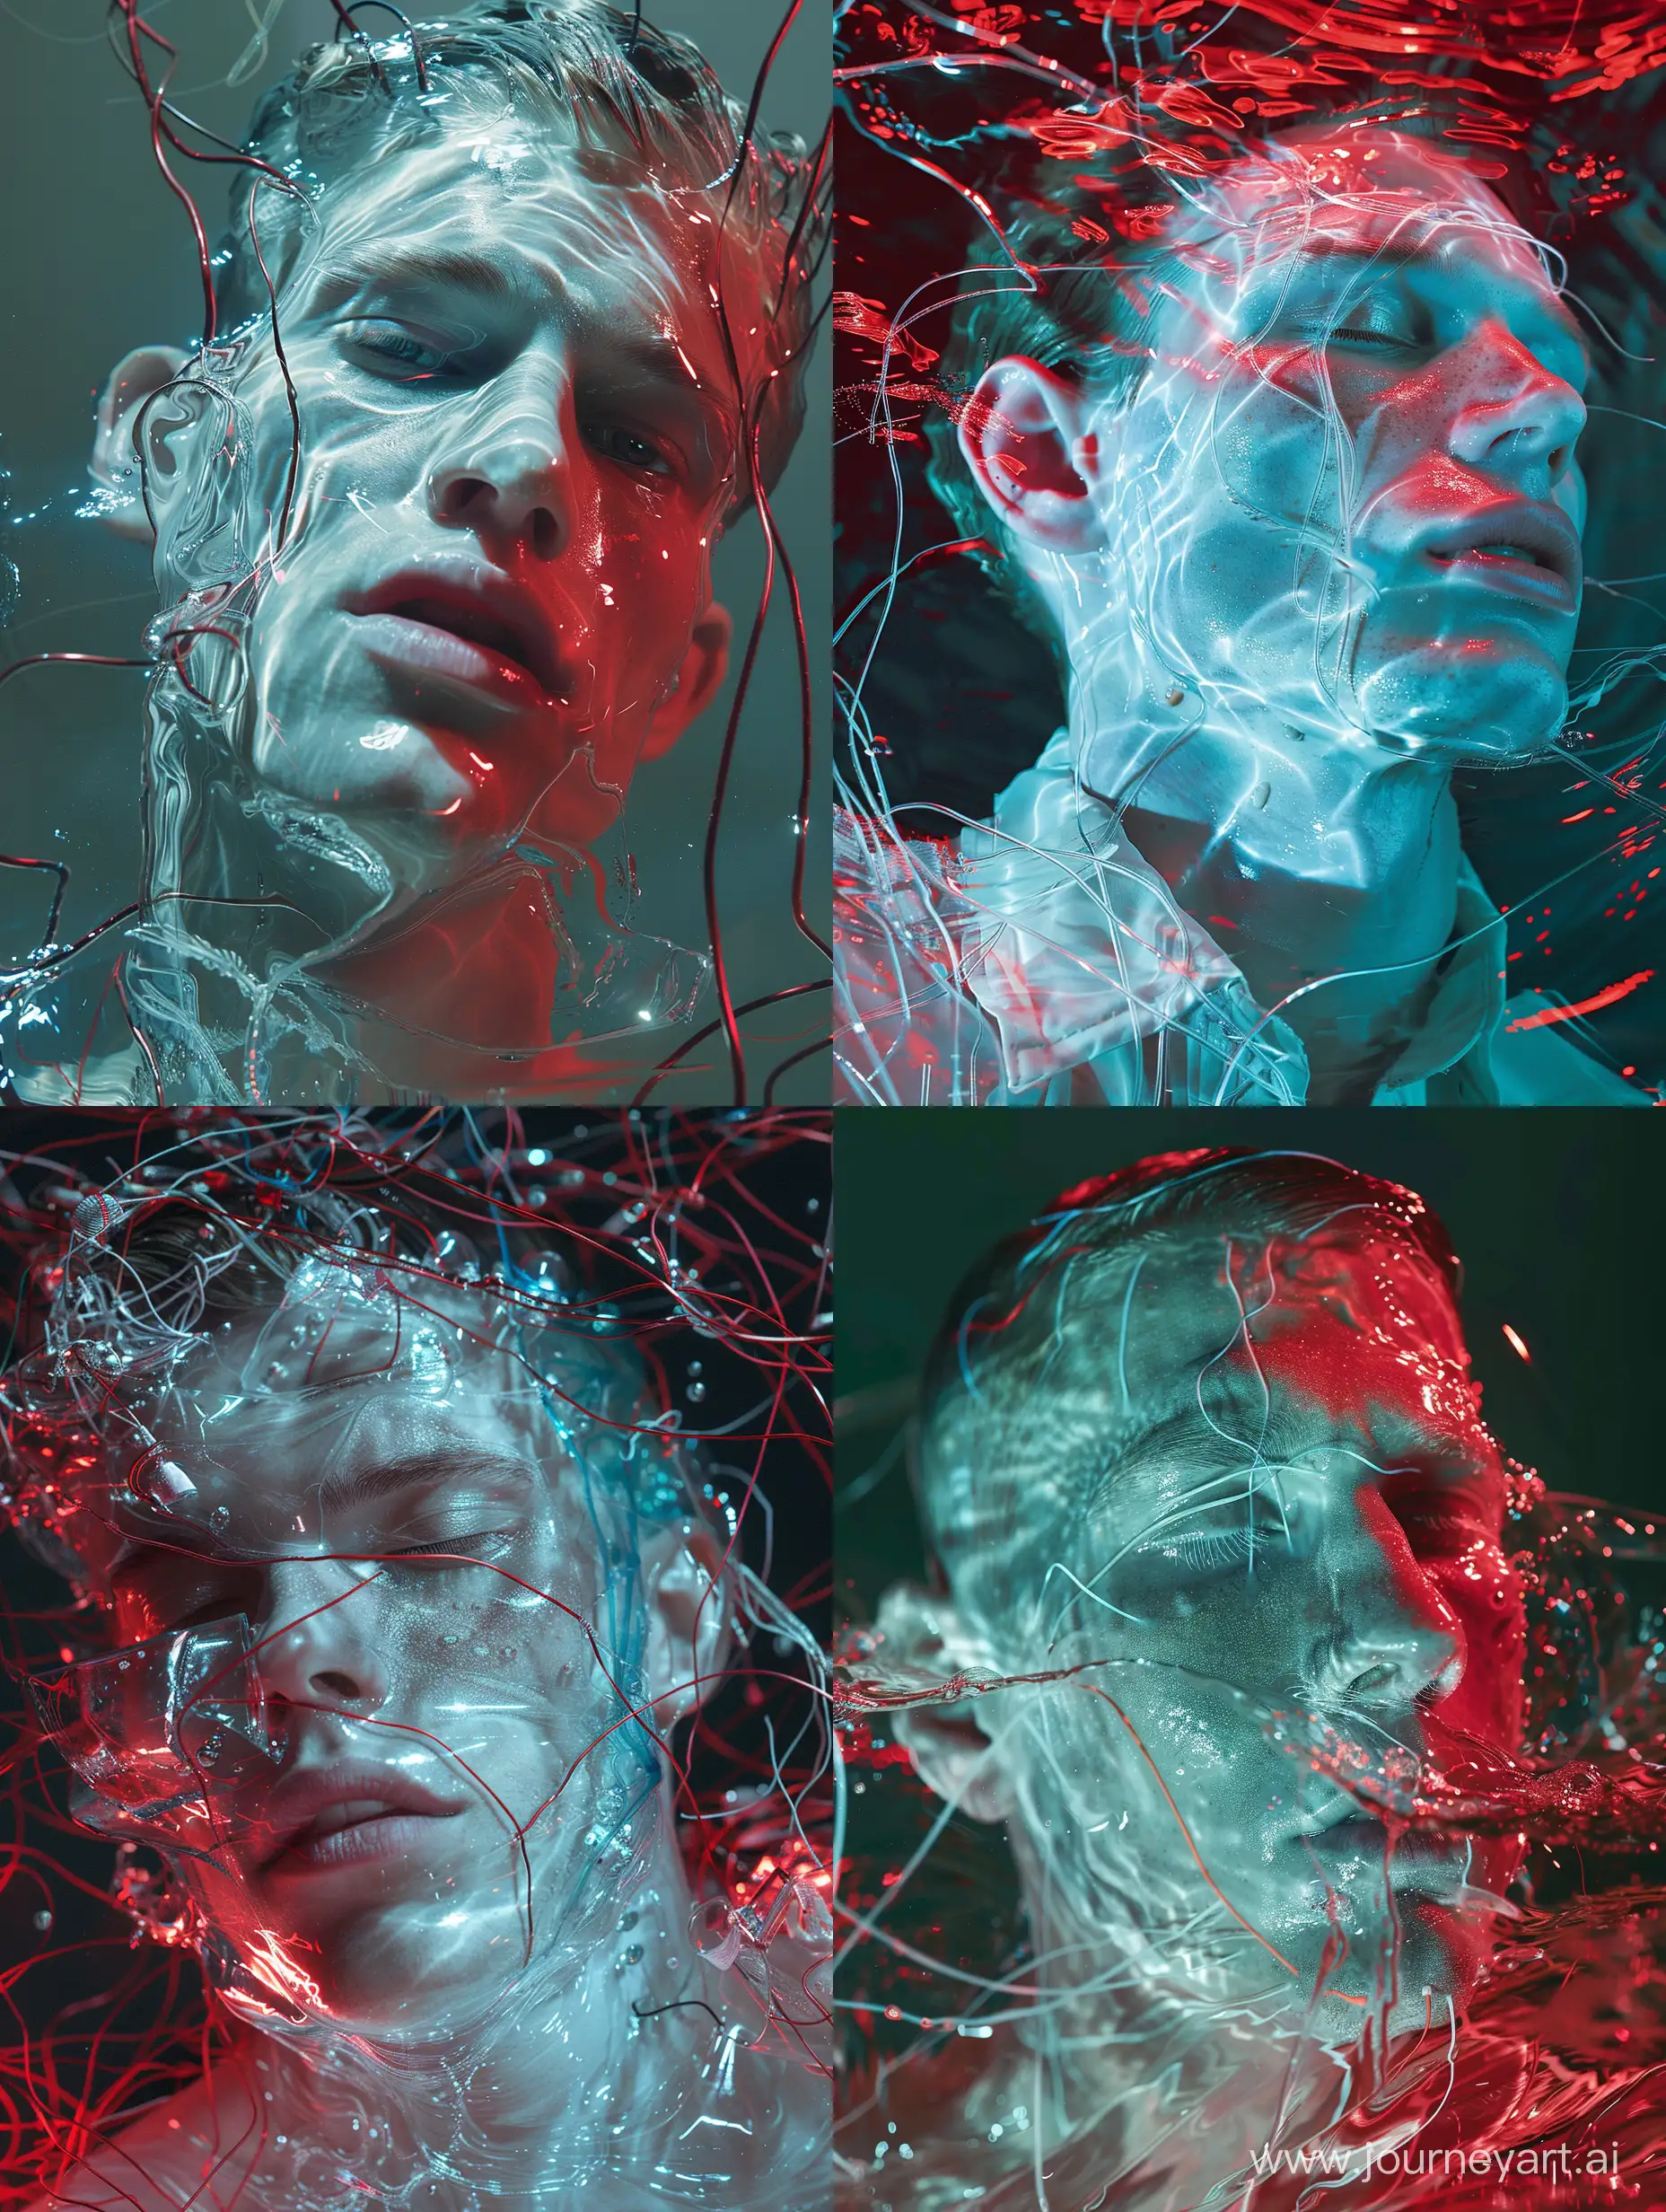 Ethereal-Man-Immersed-in-a-Web-of-Wires-Tim-Walkers-HauteCouture-Portrait